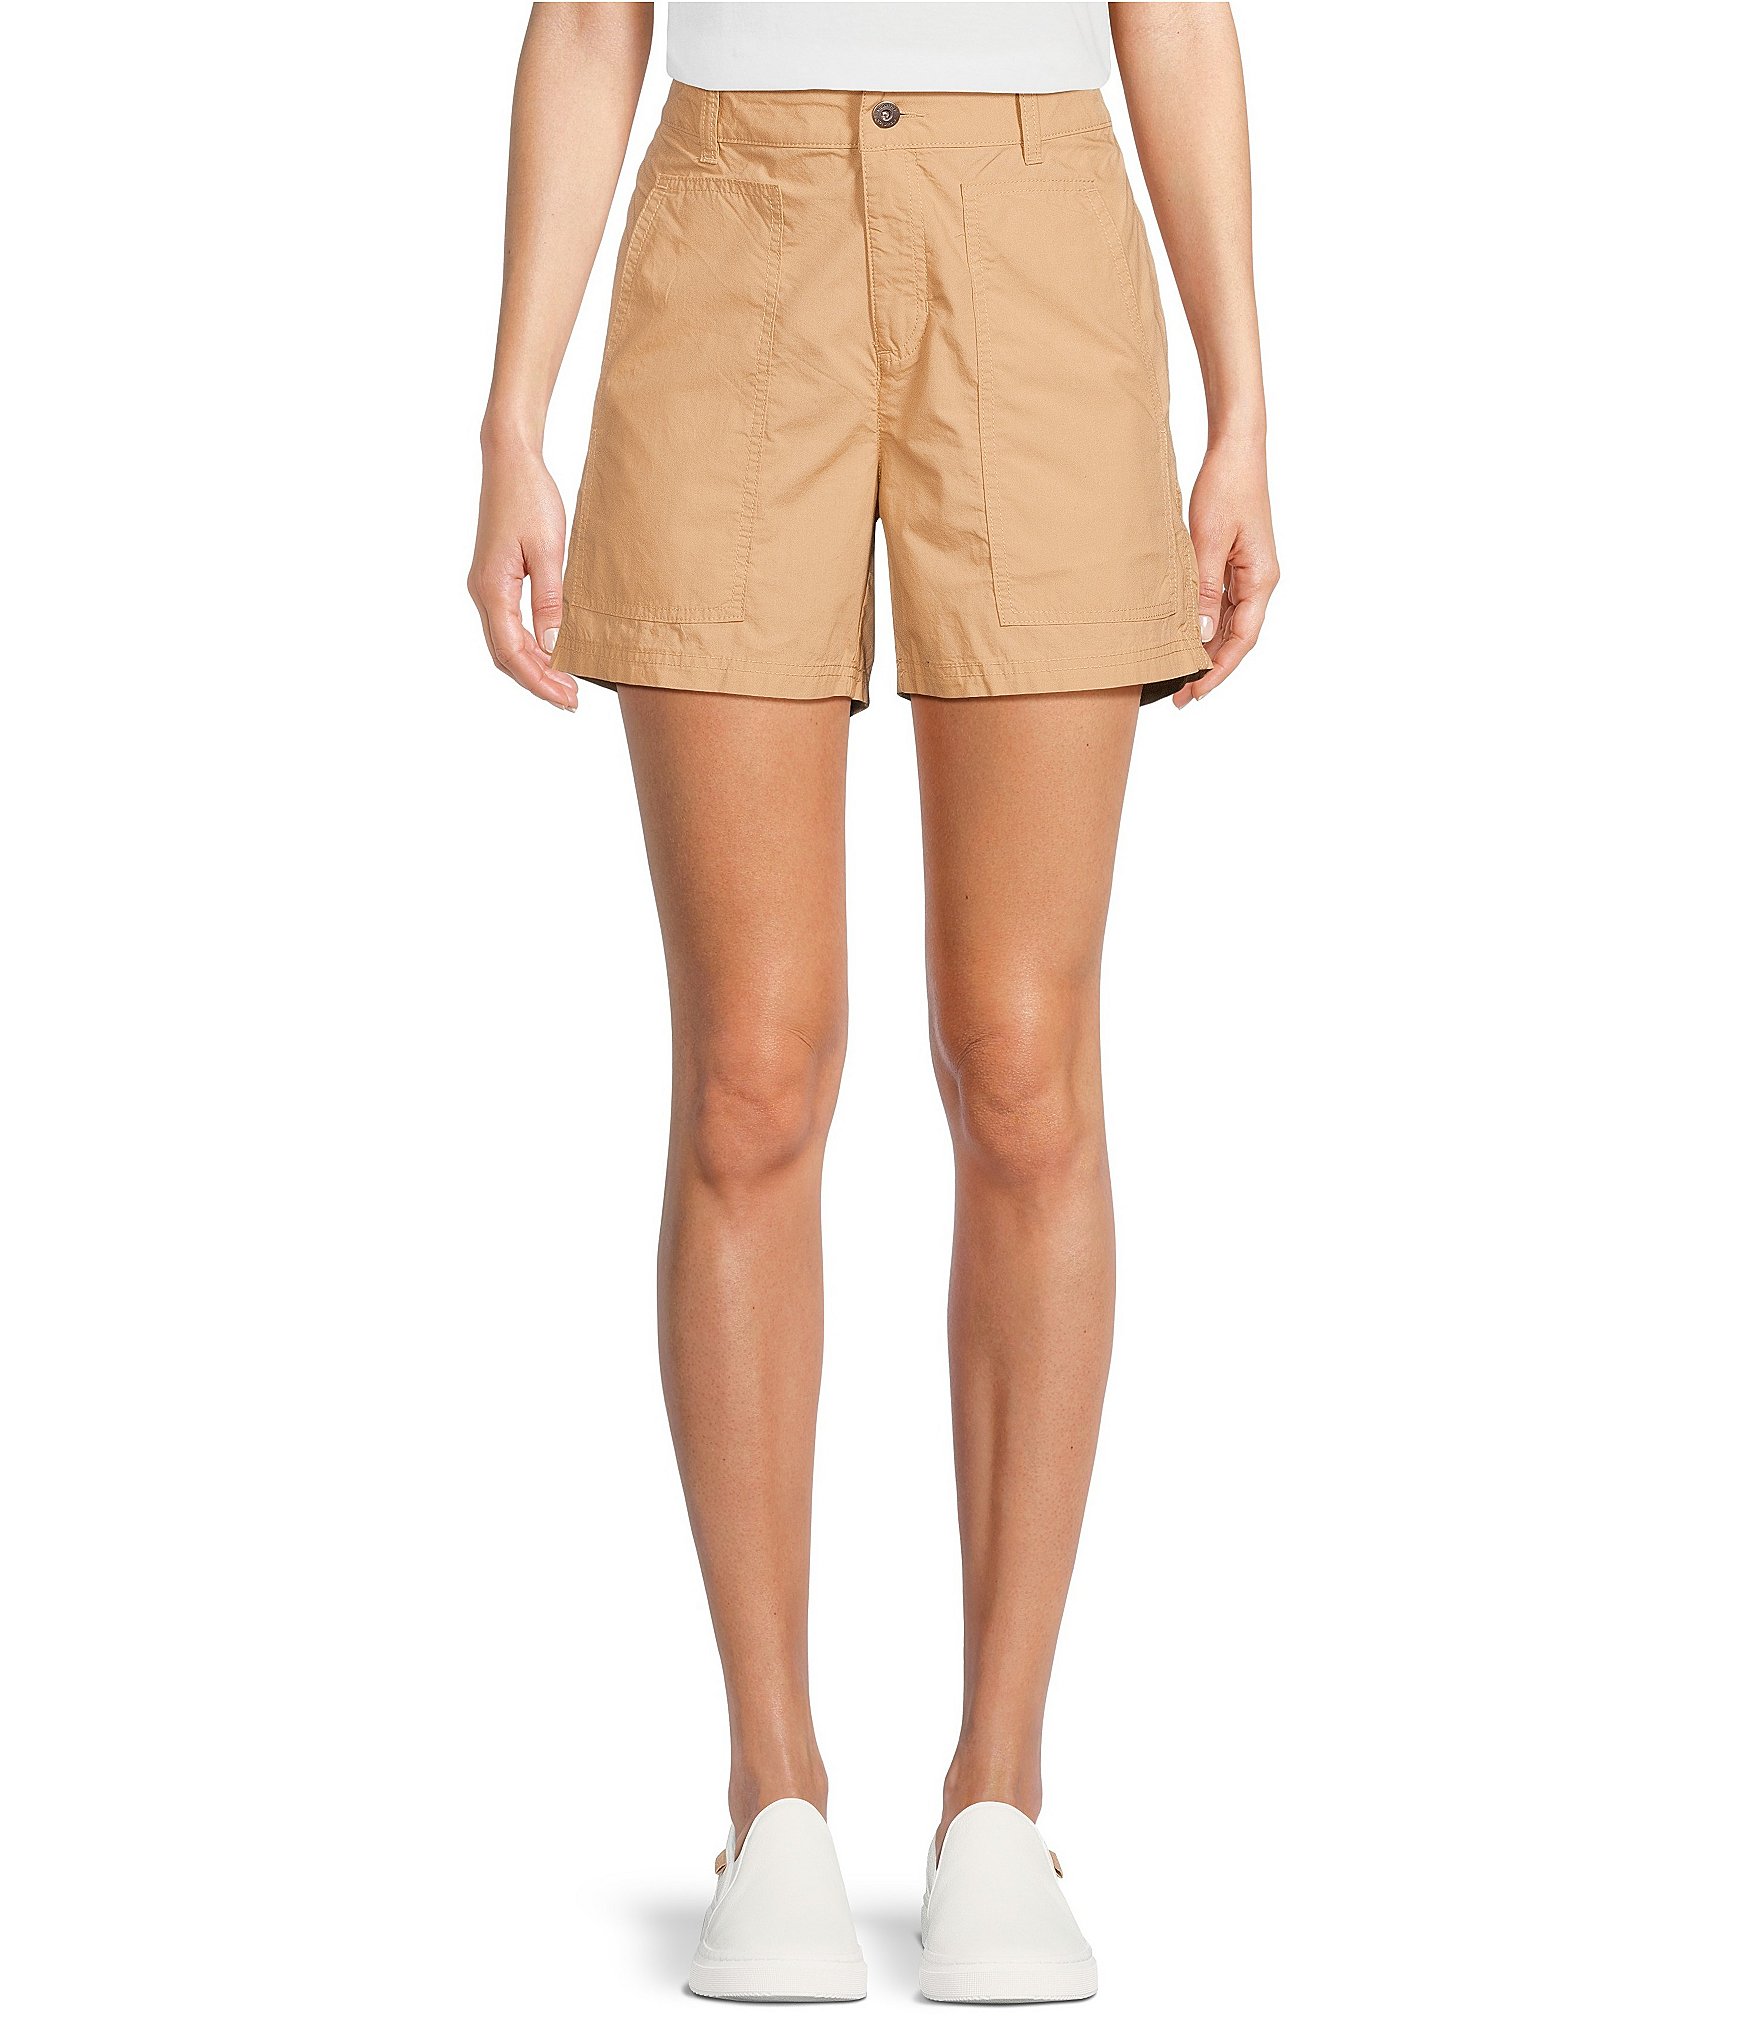 Addison Bay High Waisted Pleated Performance Clubhouse Tennis Skort